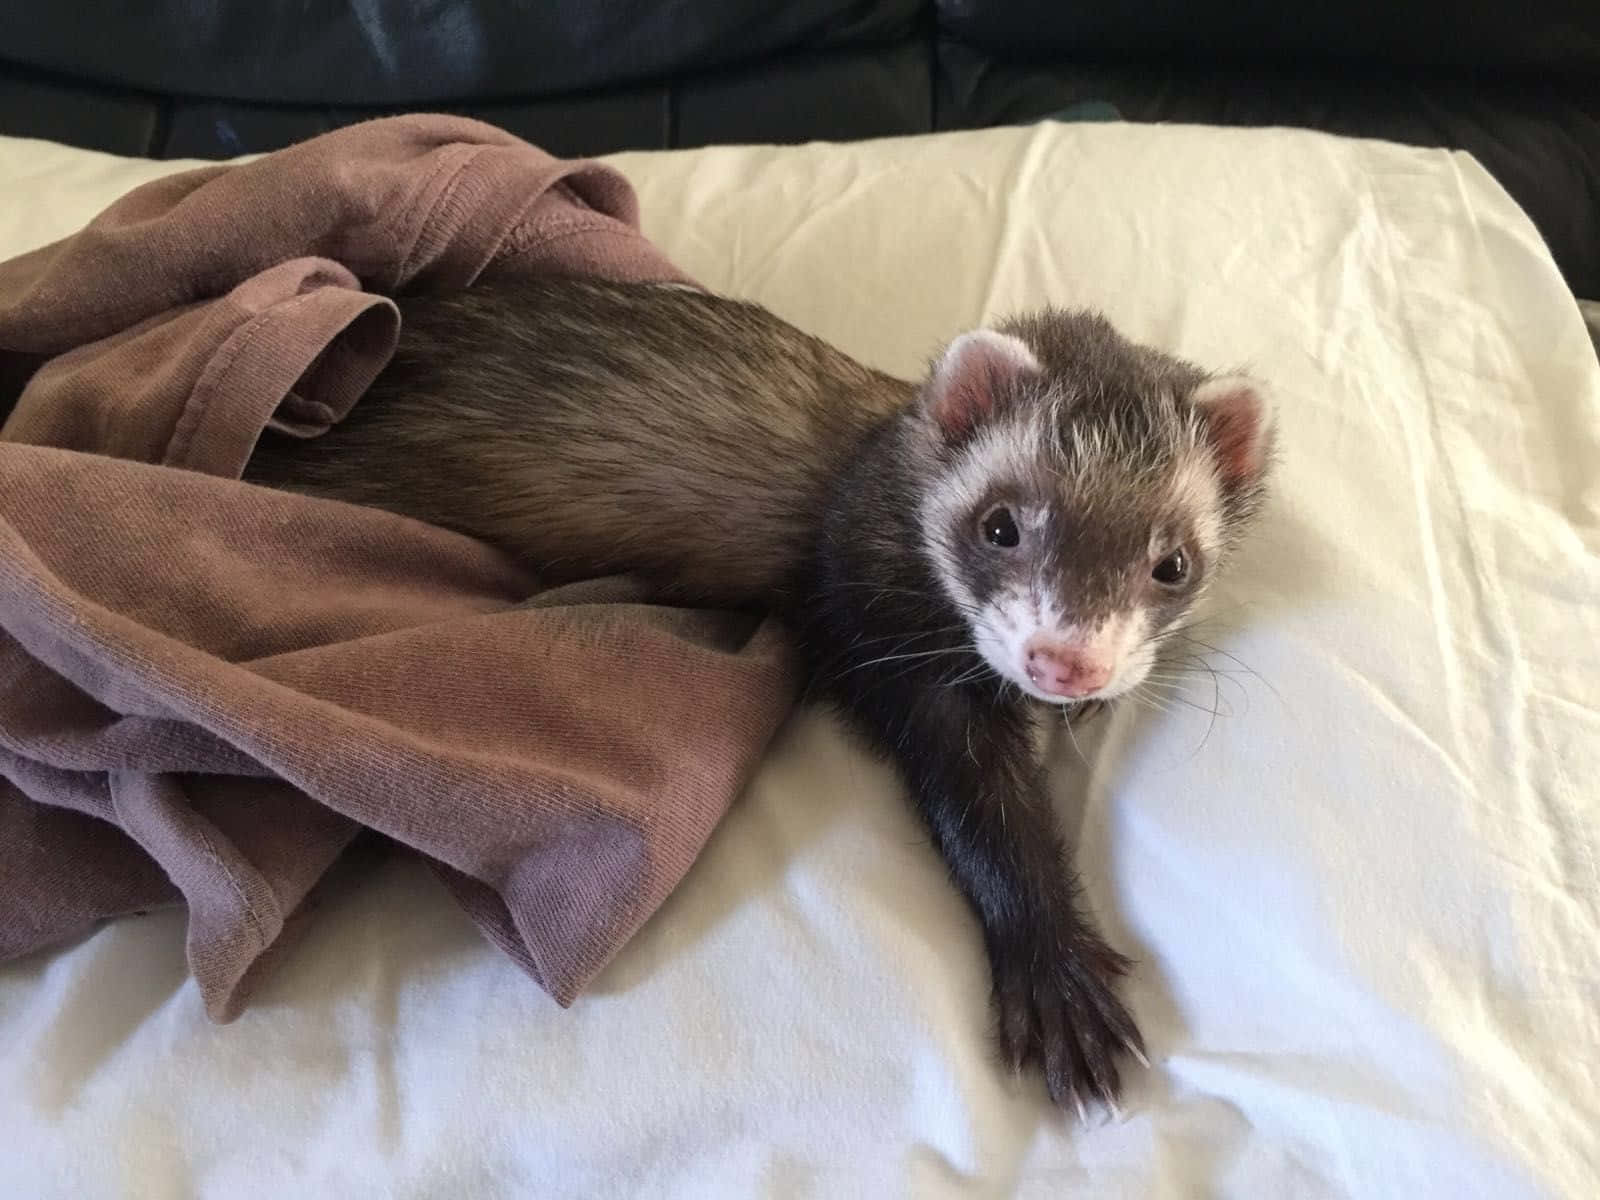 Cute ferret cuddled up next to a toy